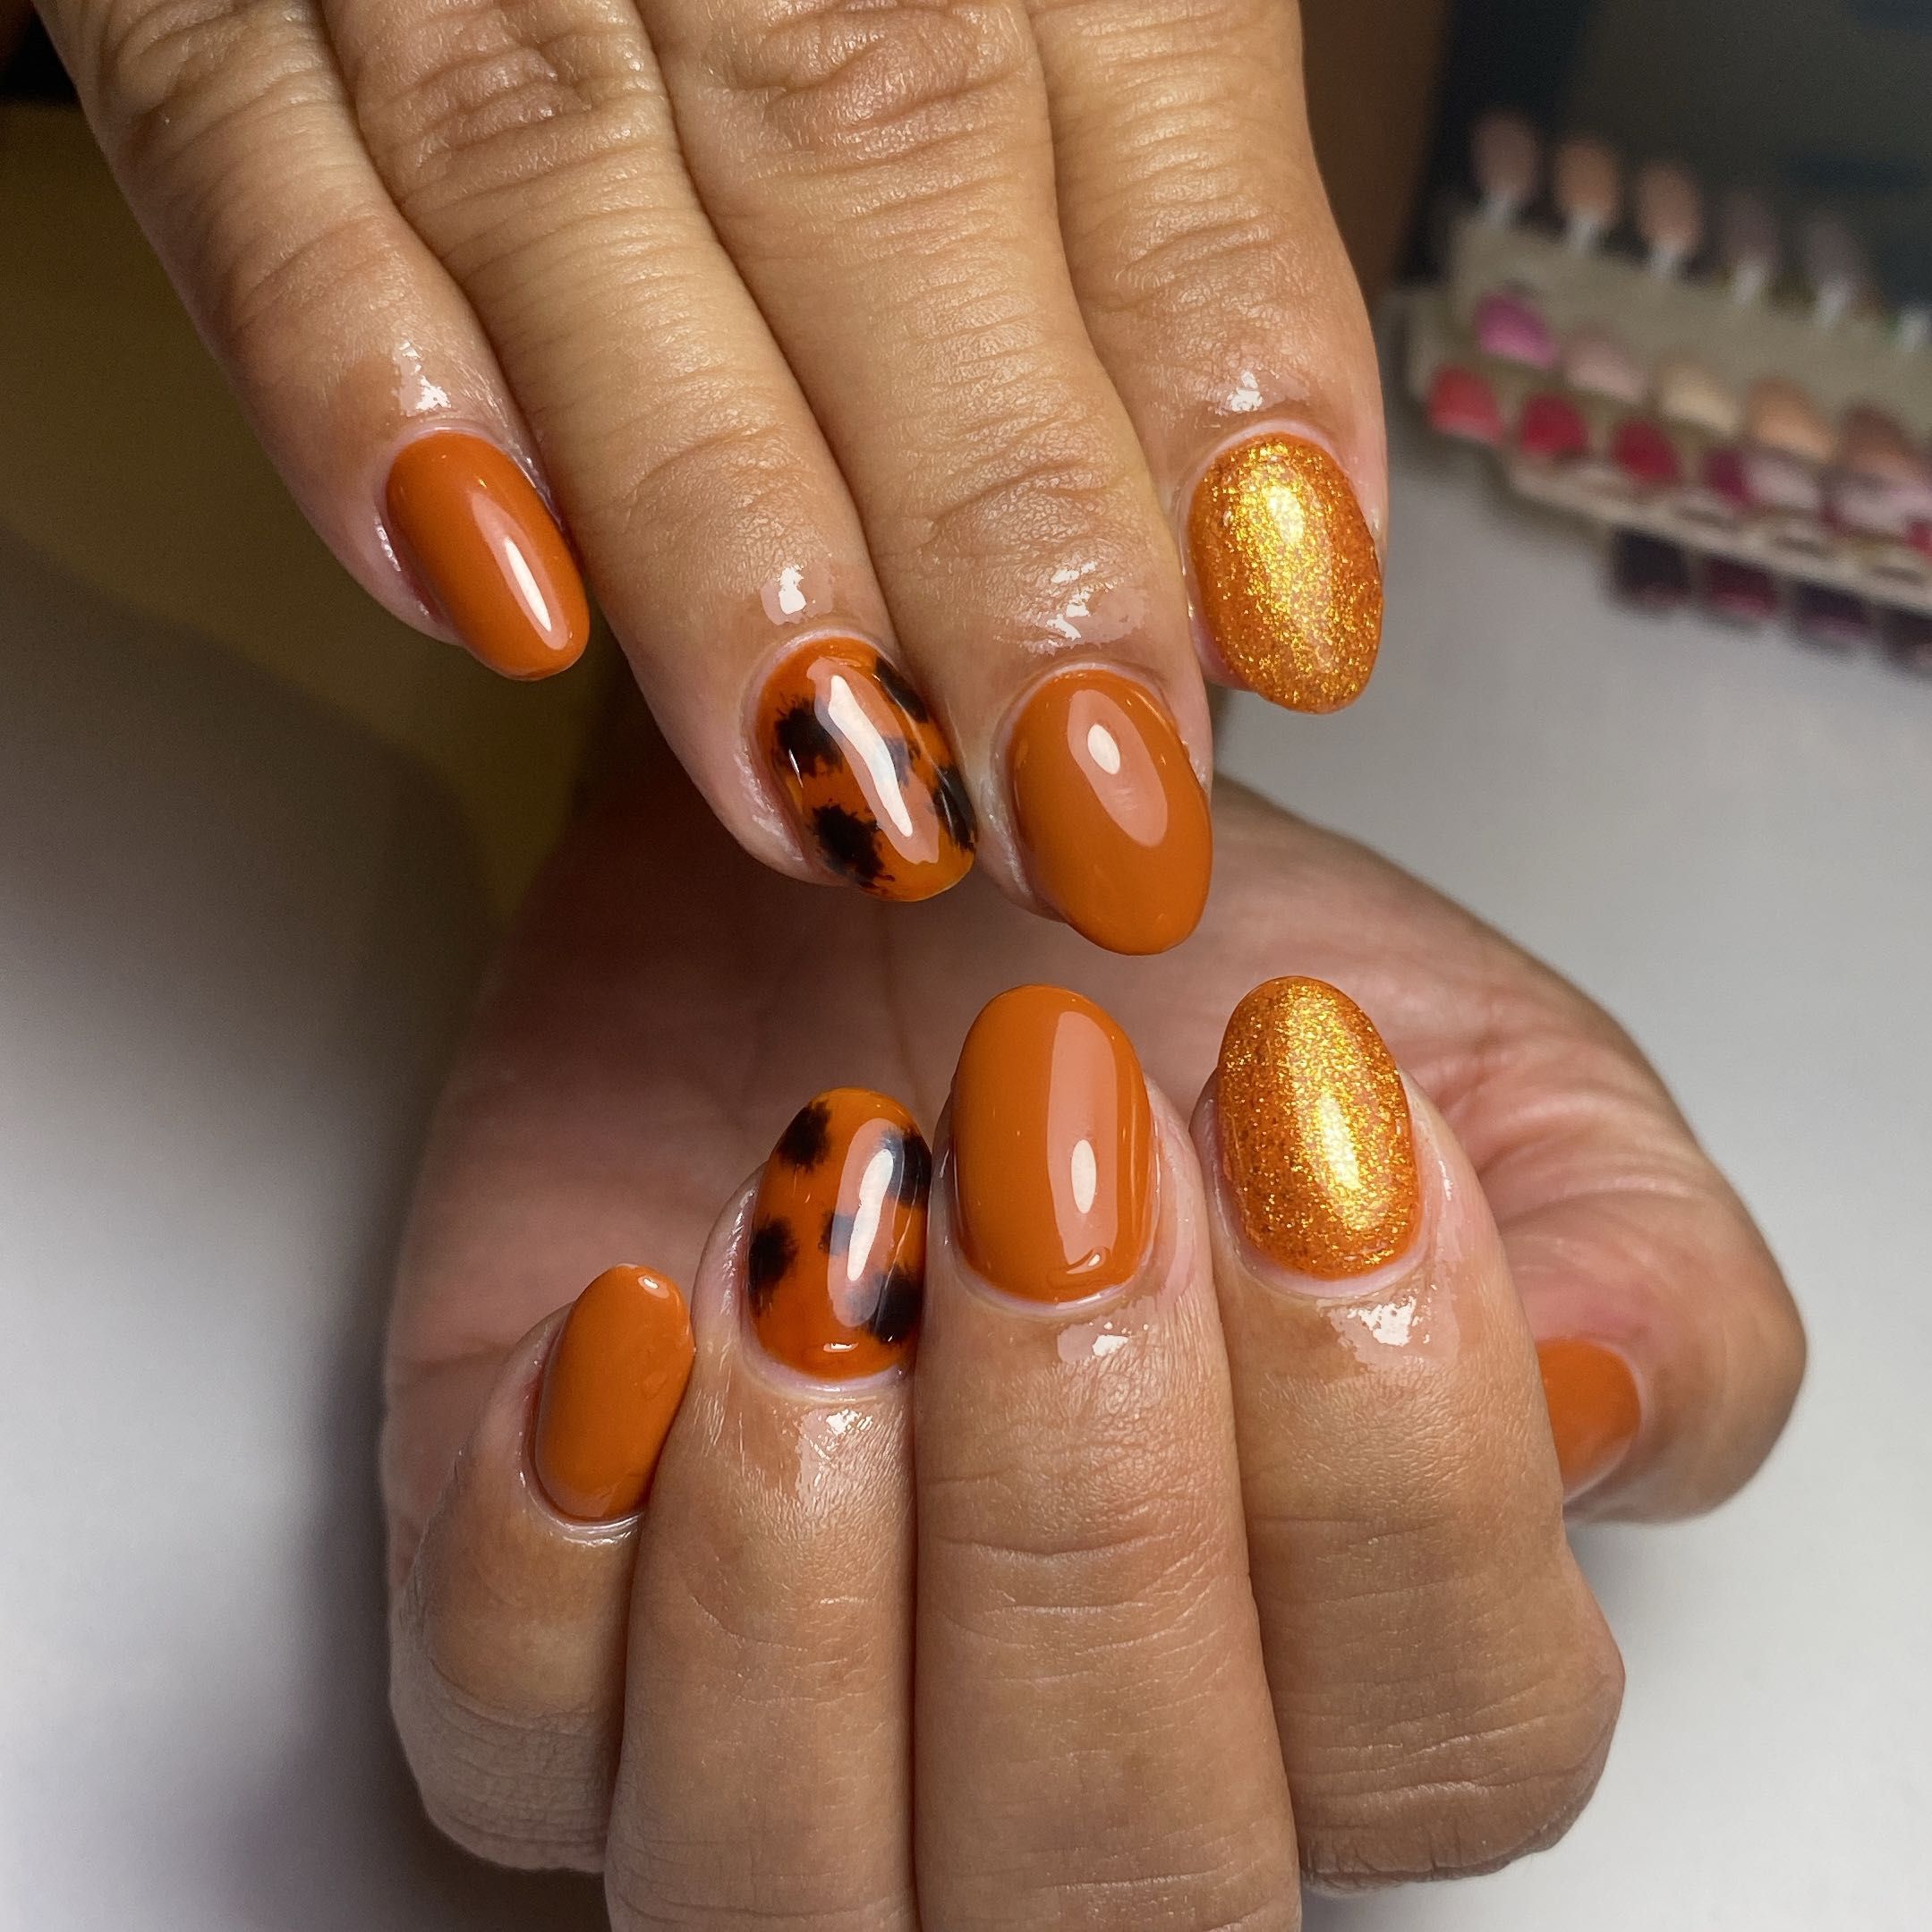 Fill to use natural nails w/a structure mani portfolio